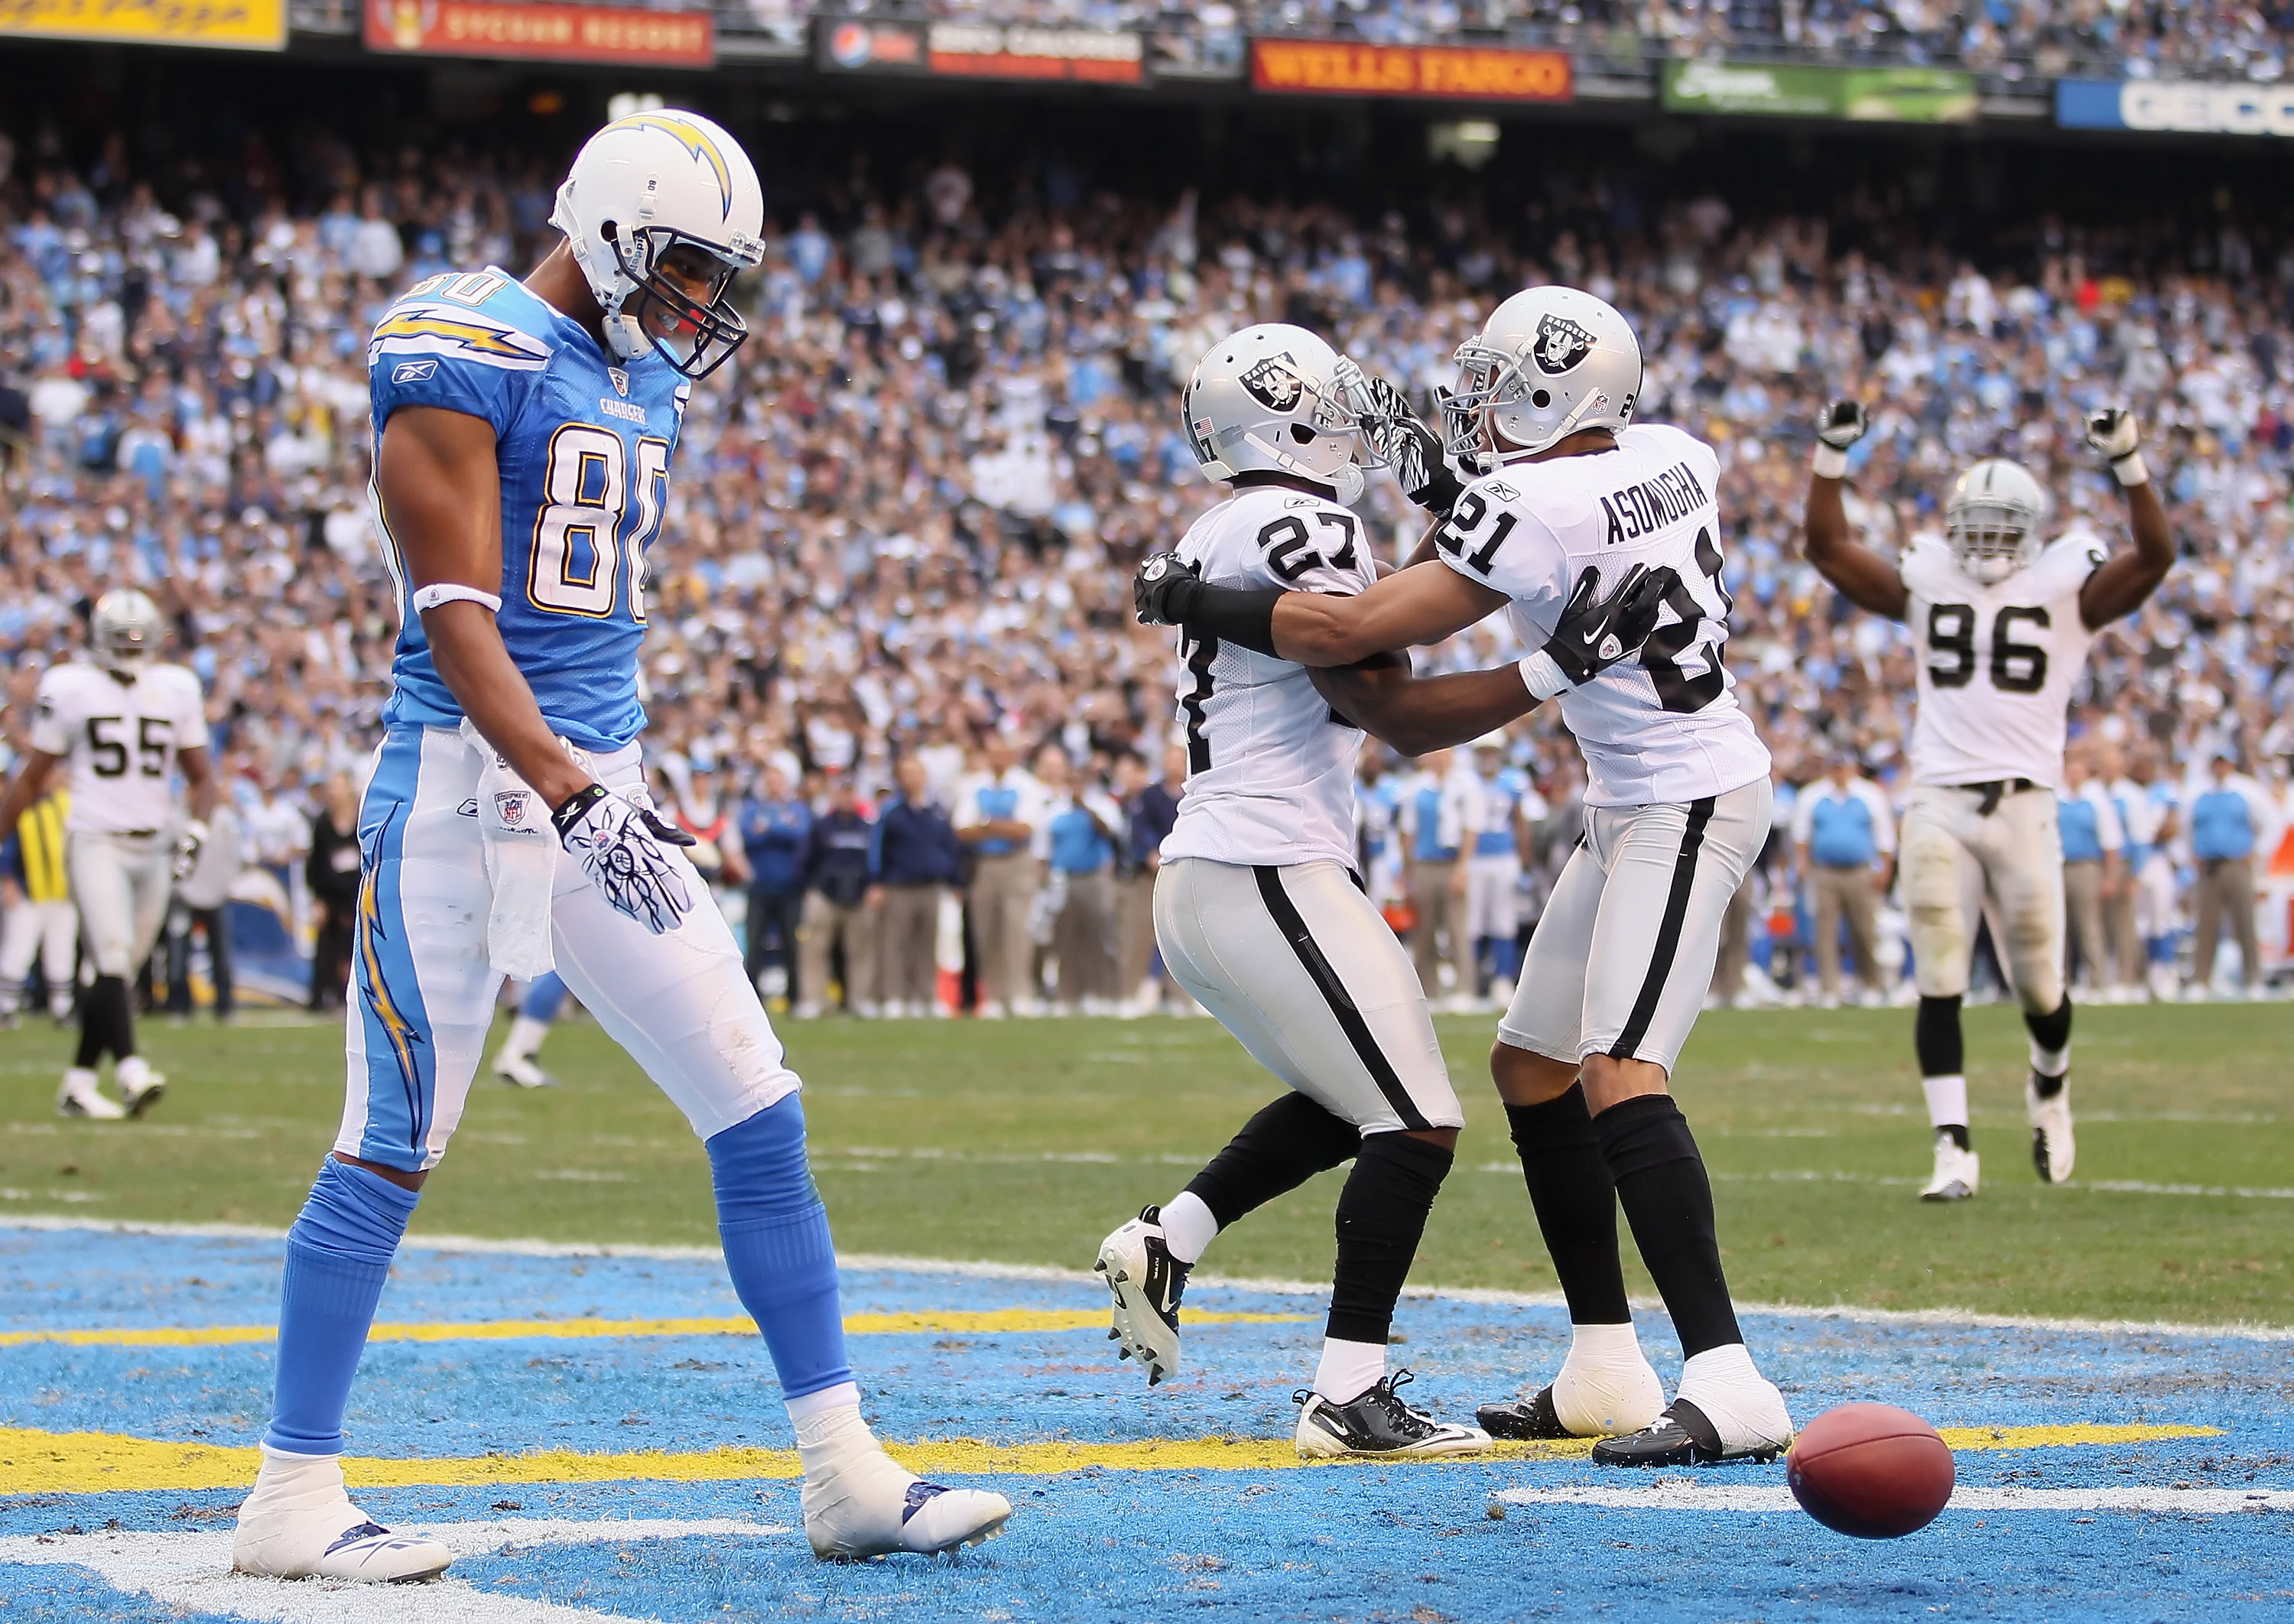 Chargers vs. Raiders The Good, the Bad and the Ugly for the Bolts in